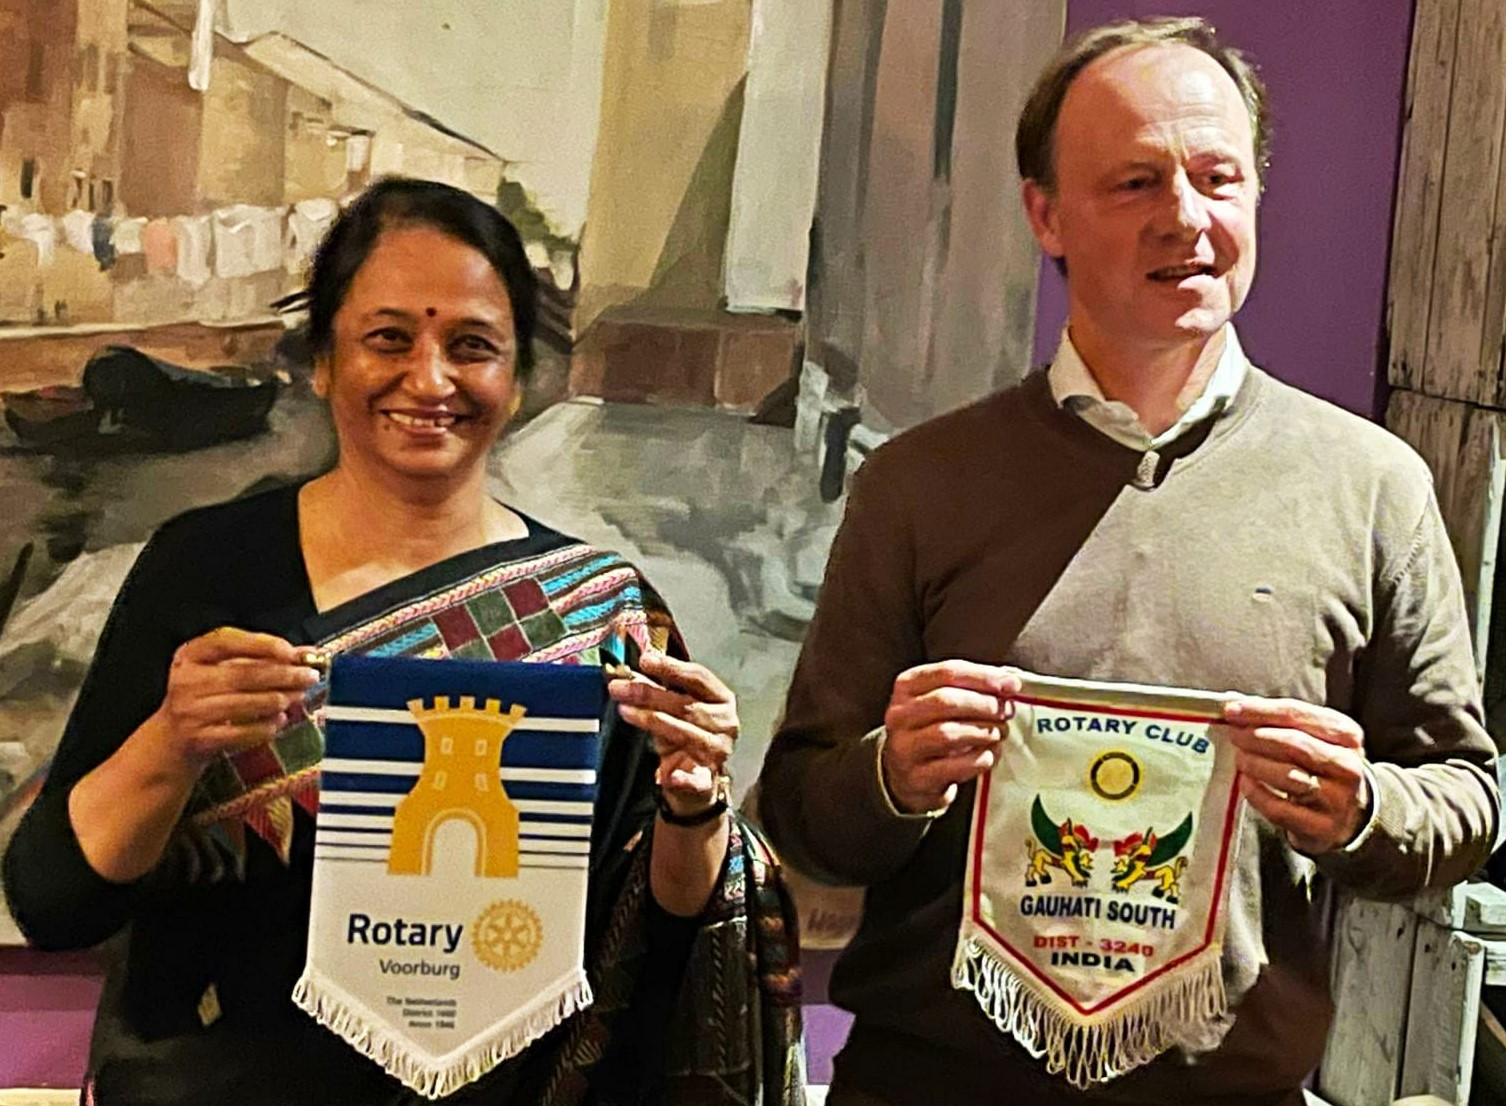 FLAG EXCHANGE PROGRAM WITH ROTARY CLUB OF HAGUE